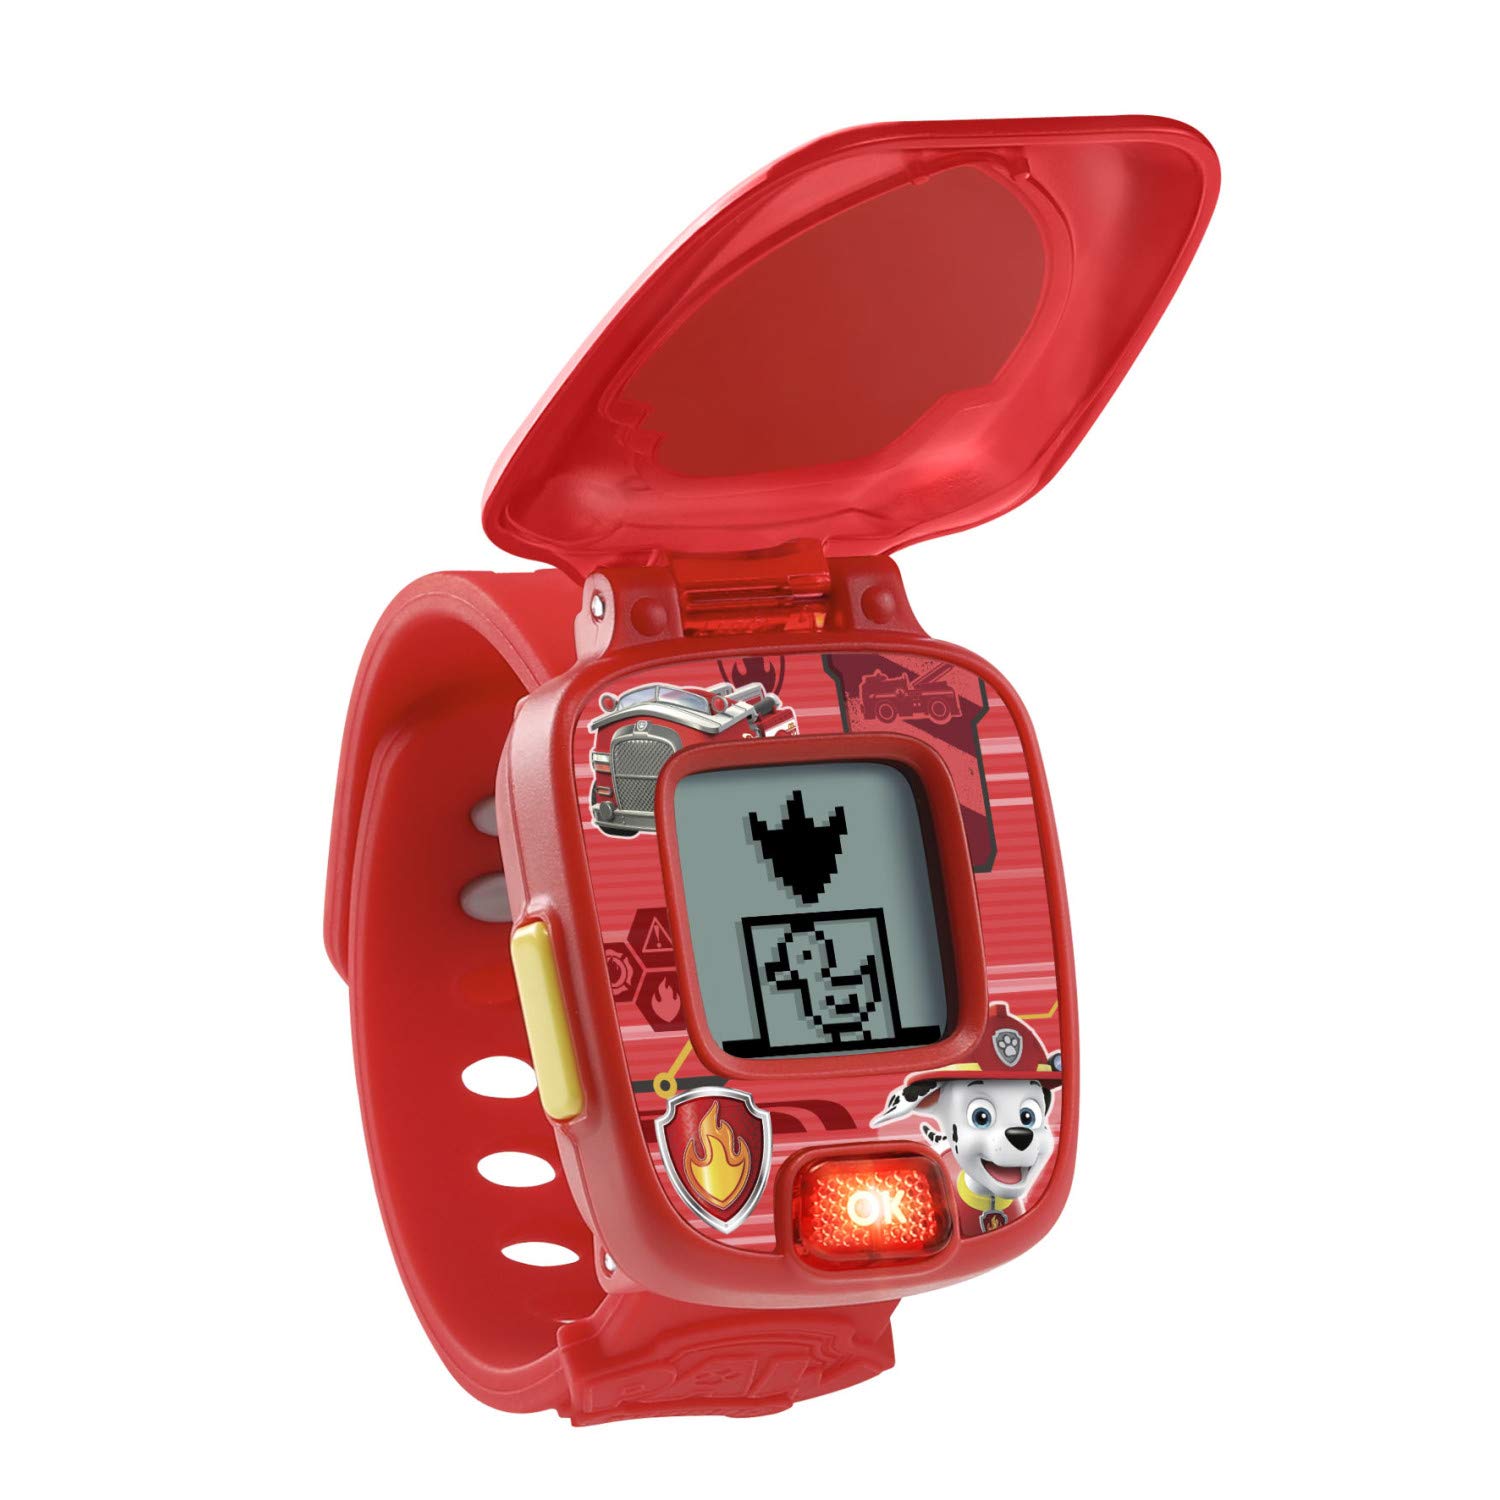 VTech Paw Patrol Kids' Marshall Learning Watch (Red) $5.95 + Free Shipping w/ Prime or on orders over $35